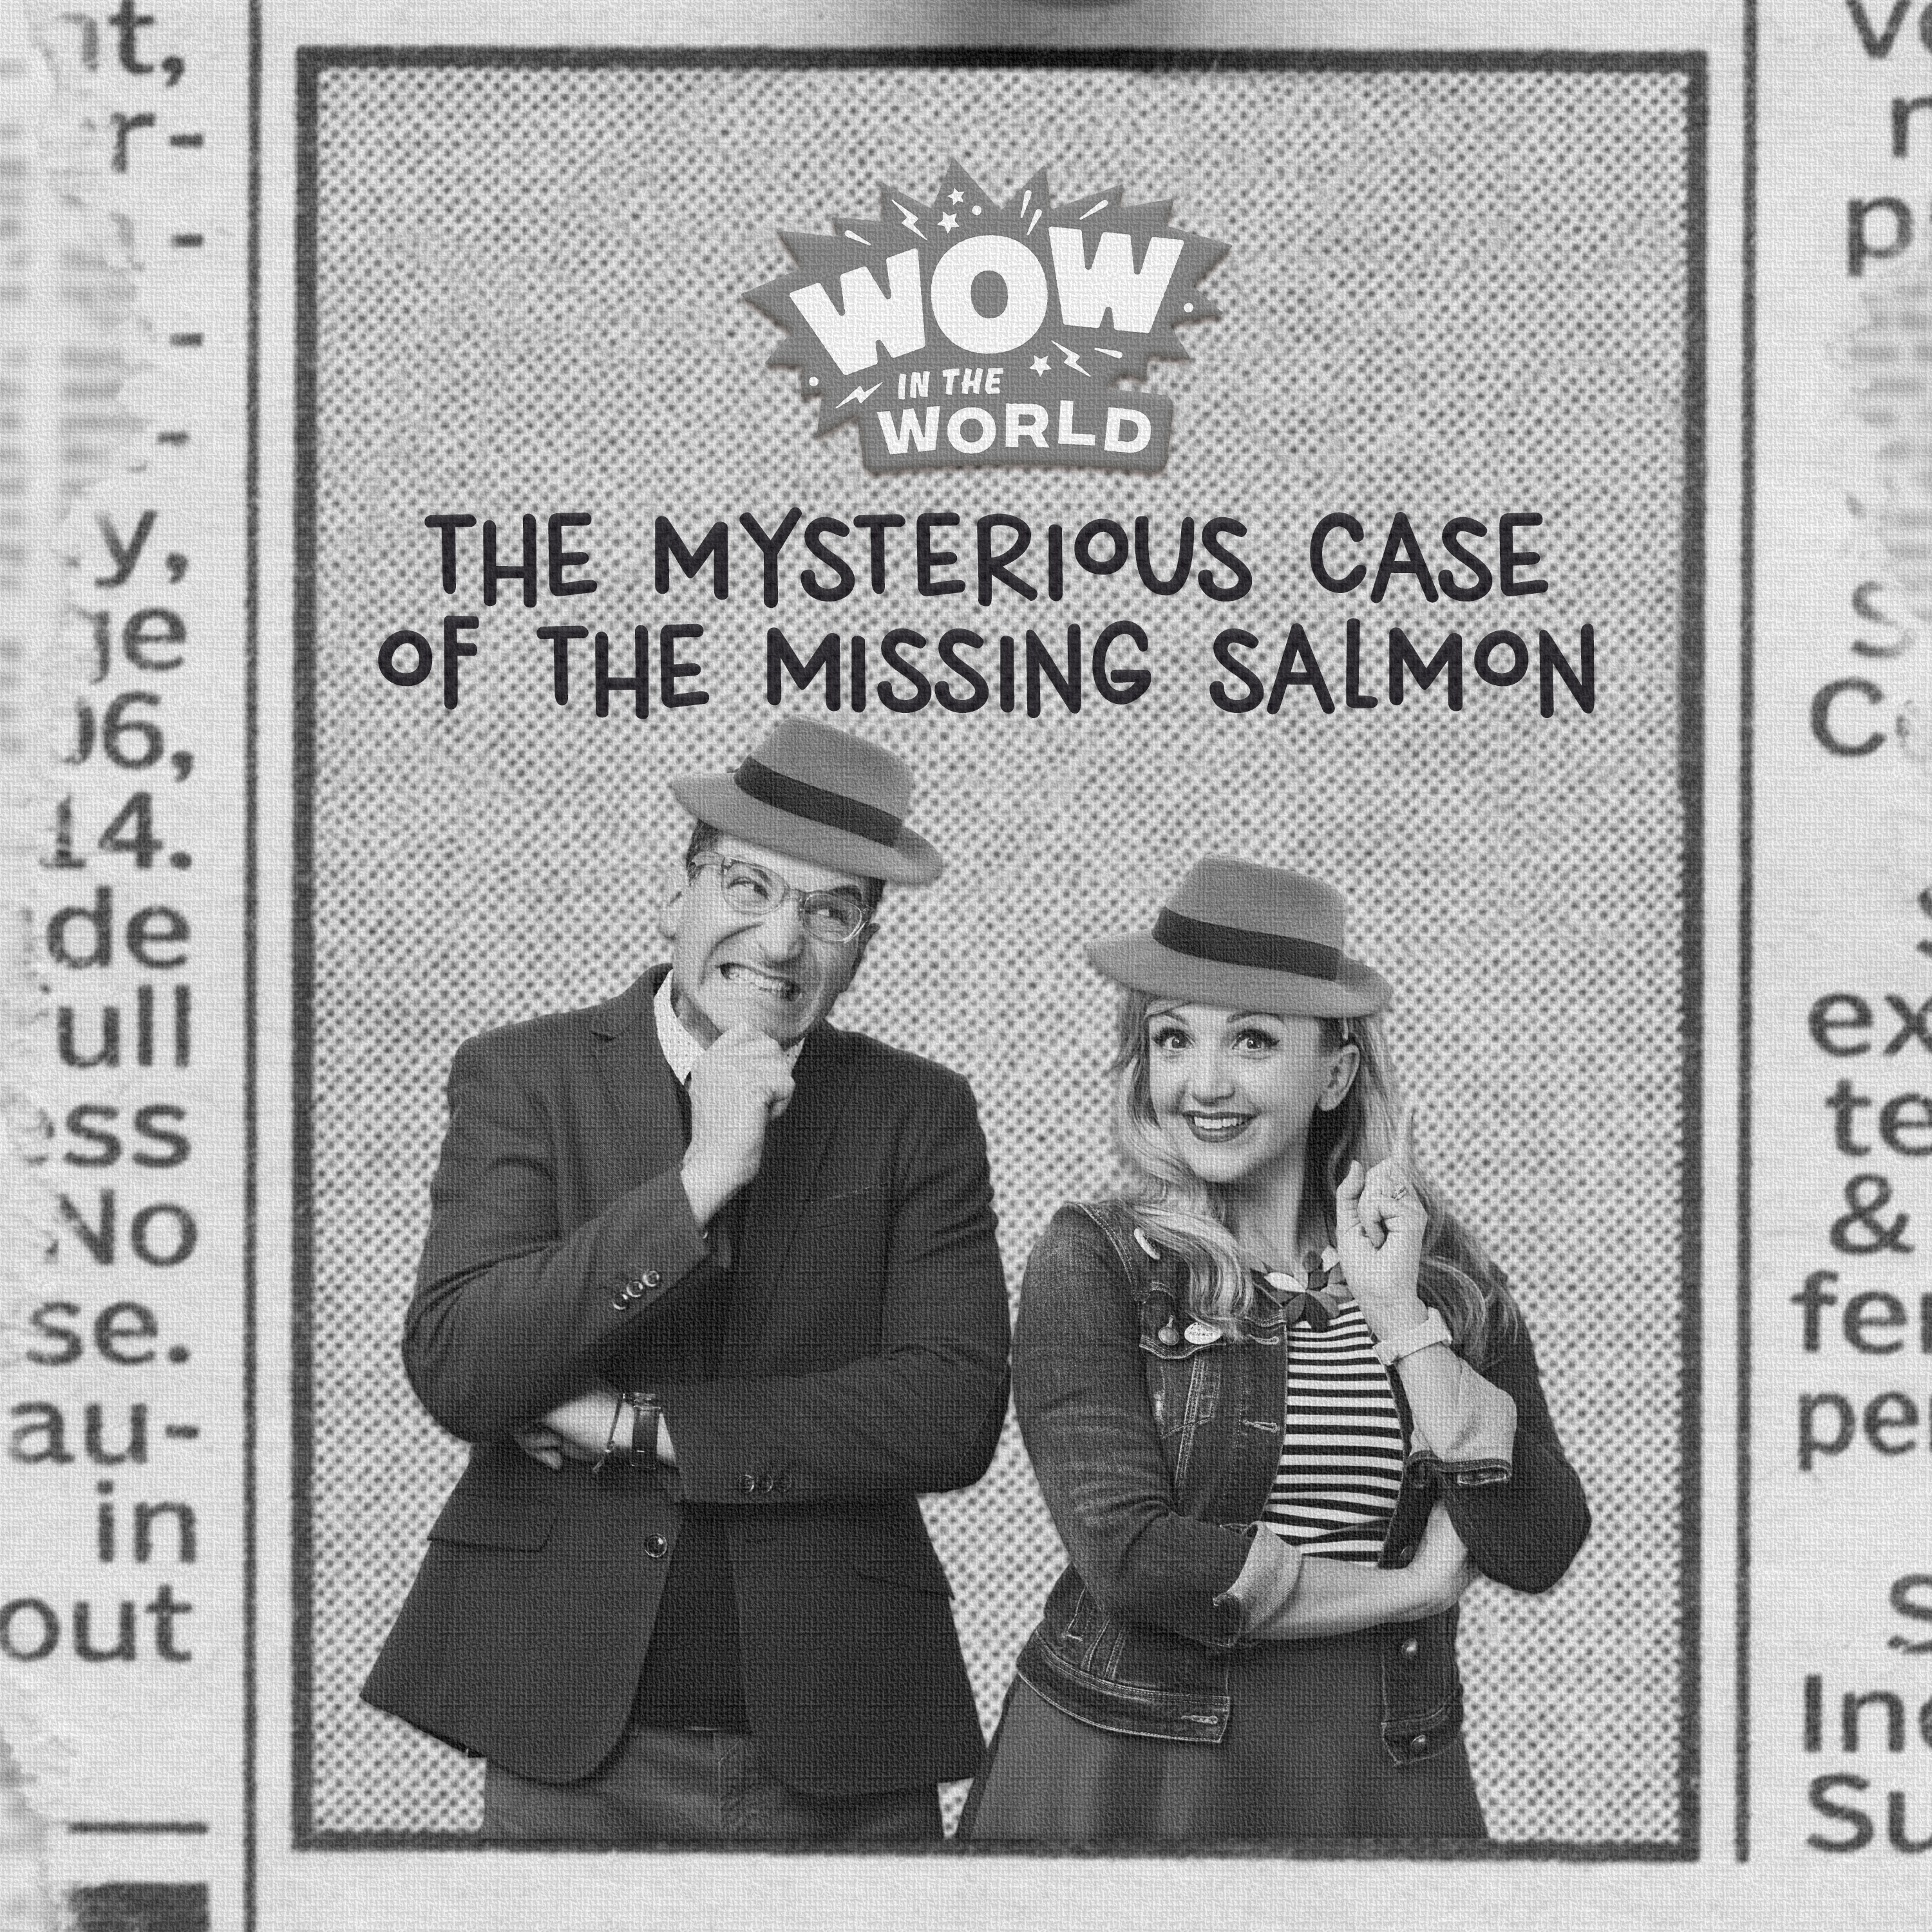 The Mysterious Case of the Missing Salmon (10/17/22)